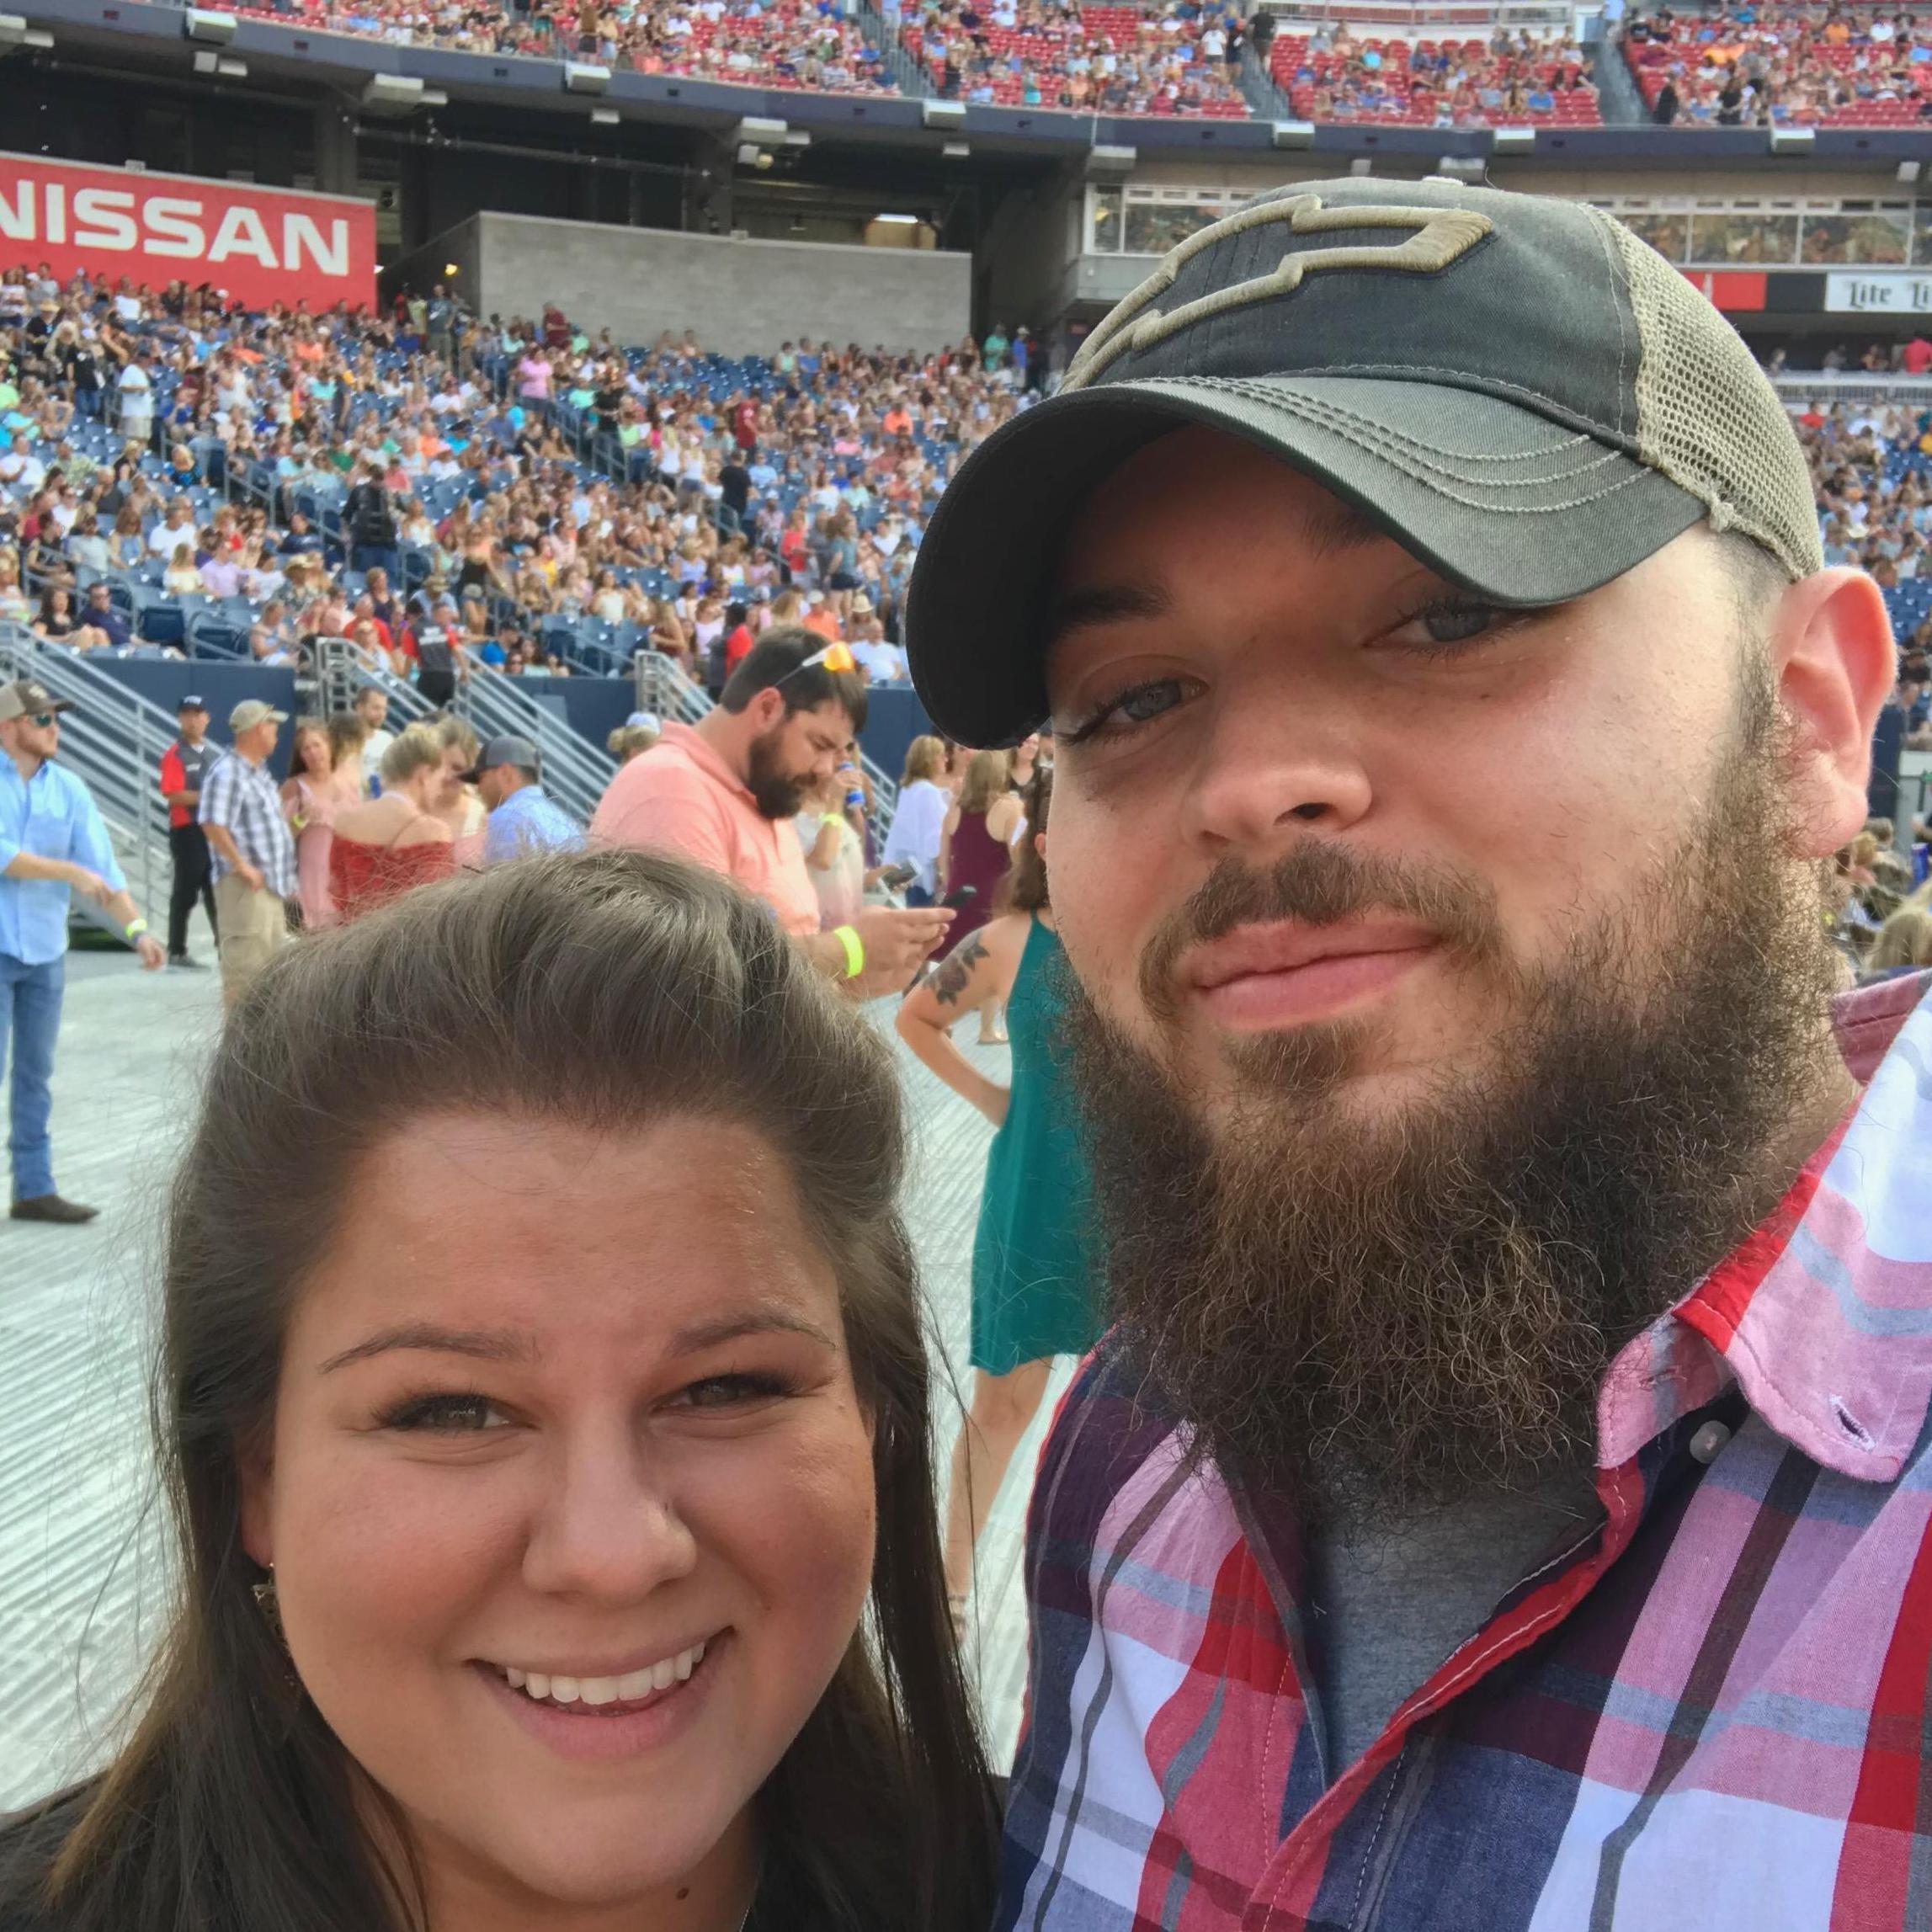 Kenny Chesney Concert - August 2018